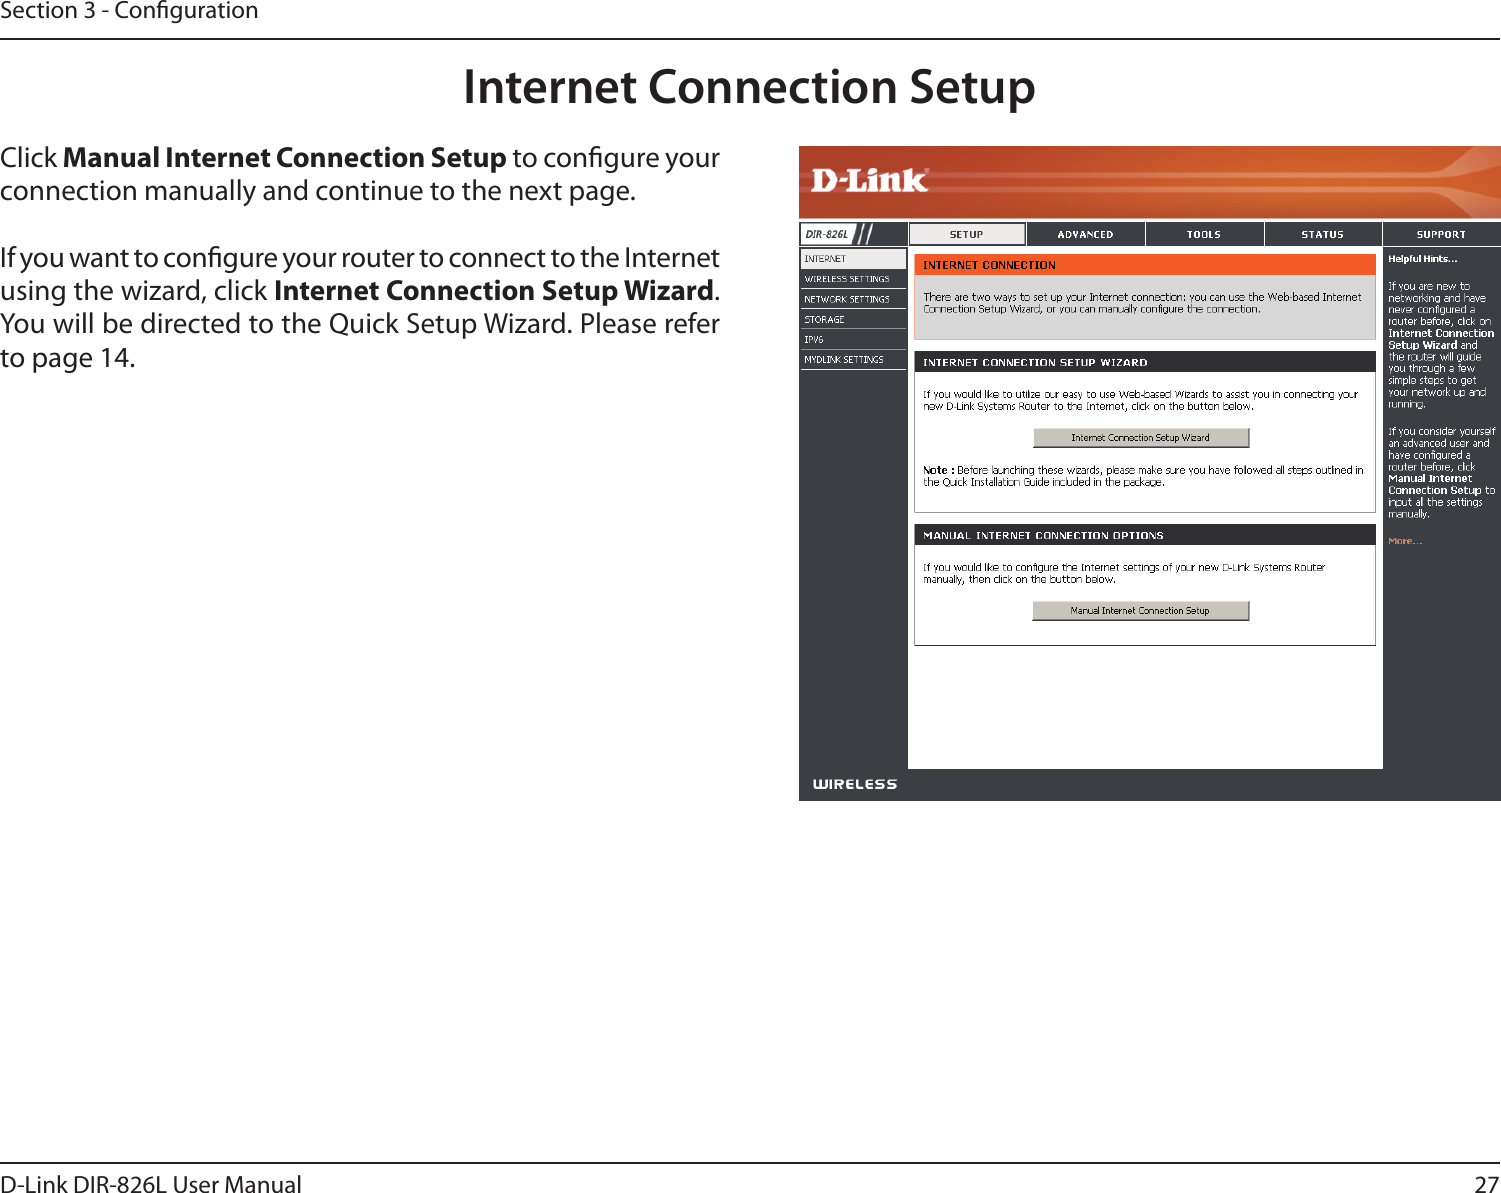 27D-Link DIR-826L User ManualSection 3 - CongurationInternet Connection SetupClick Manual Internet Connection Setup to congure your connection manually and continue to the next page.If you want to congure your router to connect to the Internet using the wizard, click Internet Connection Setup Wizard. You will be directed to the Quick Setup Wizard. Please refer to page 14.